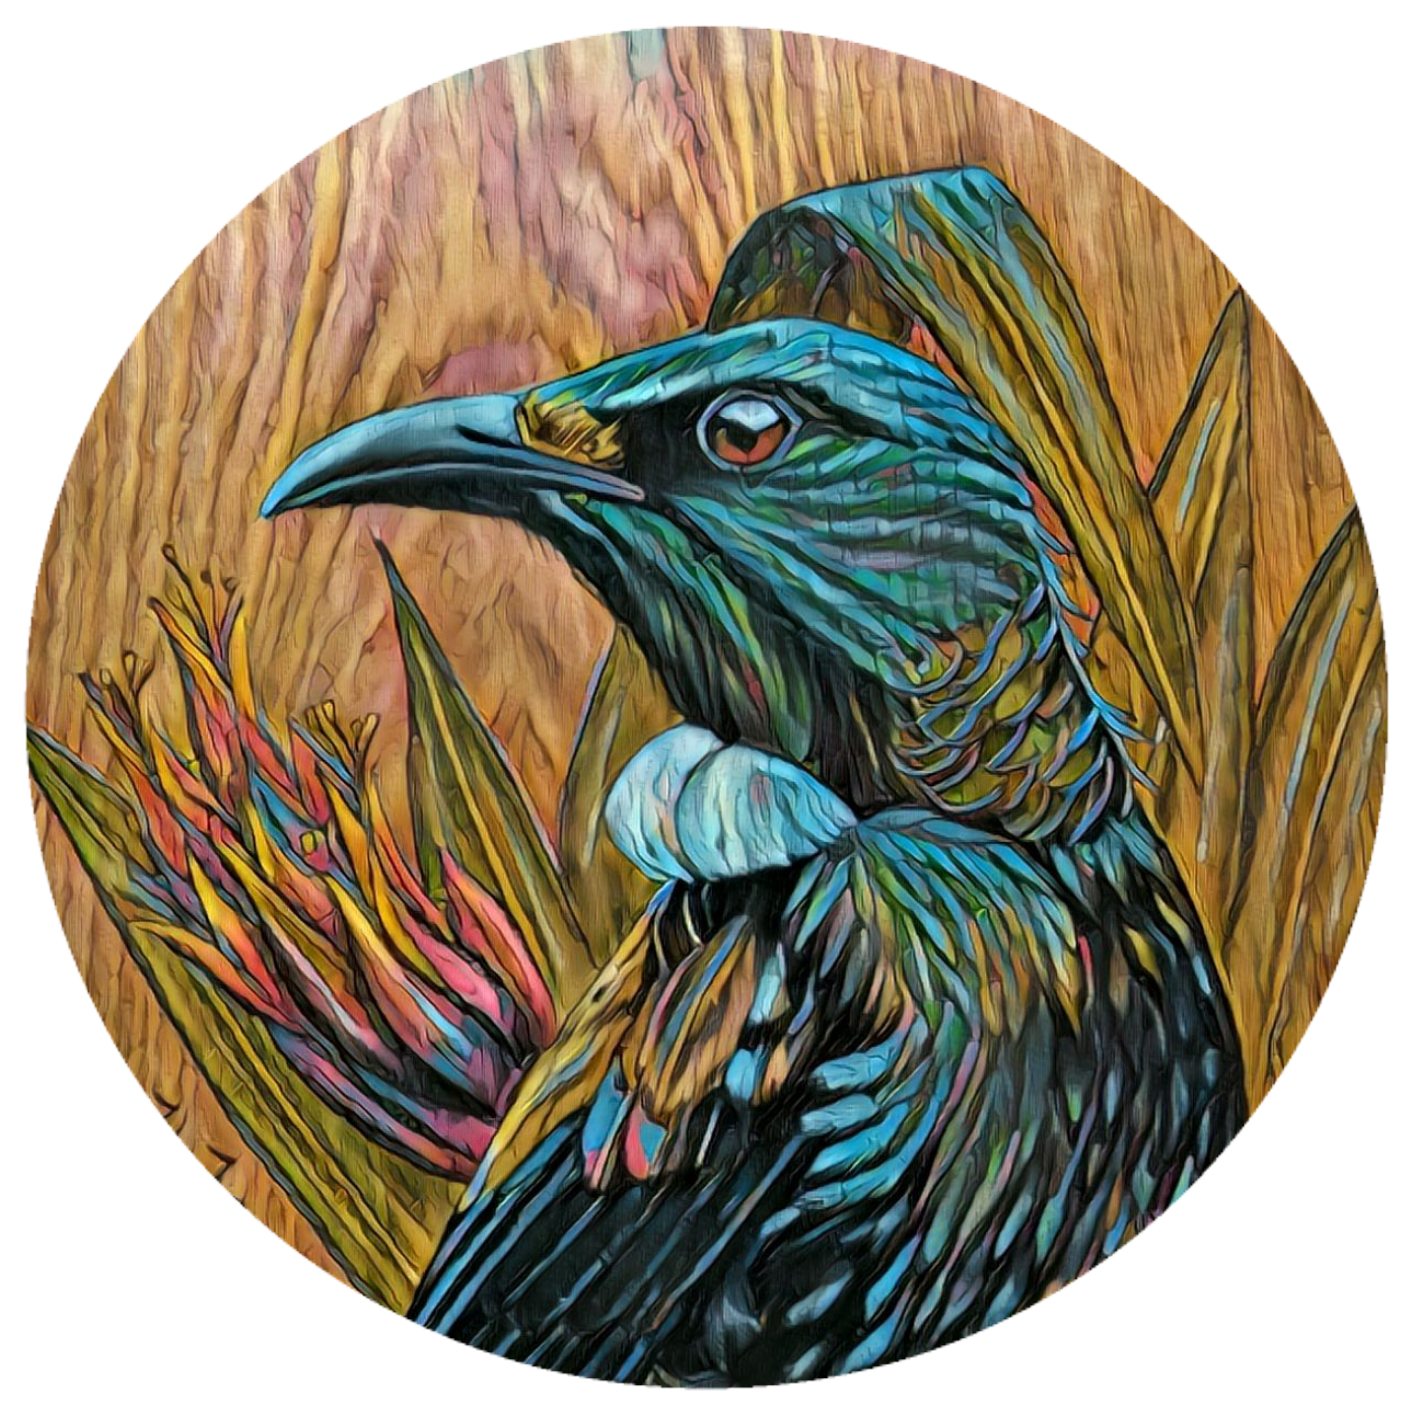 Tui in flax upon timber reworked art dot